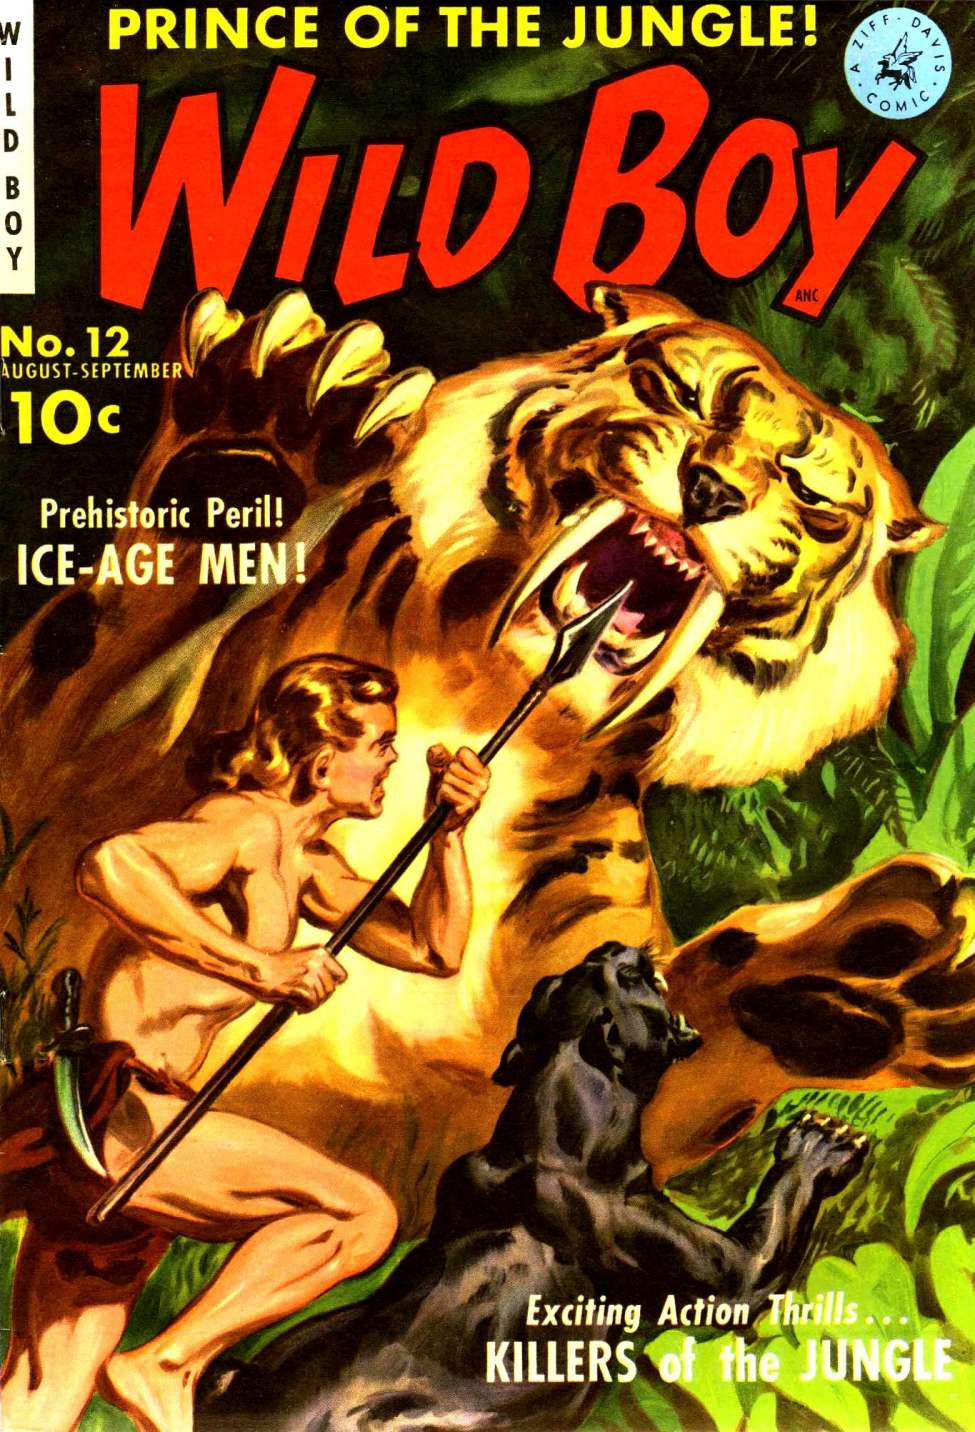 Comic Book Cover For Wild Boy 3 (12)